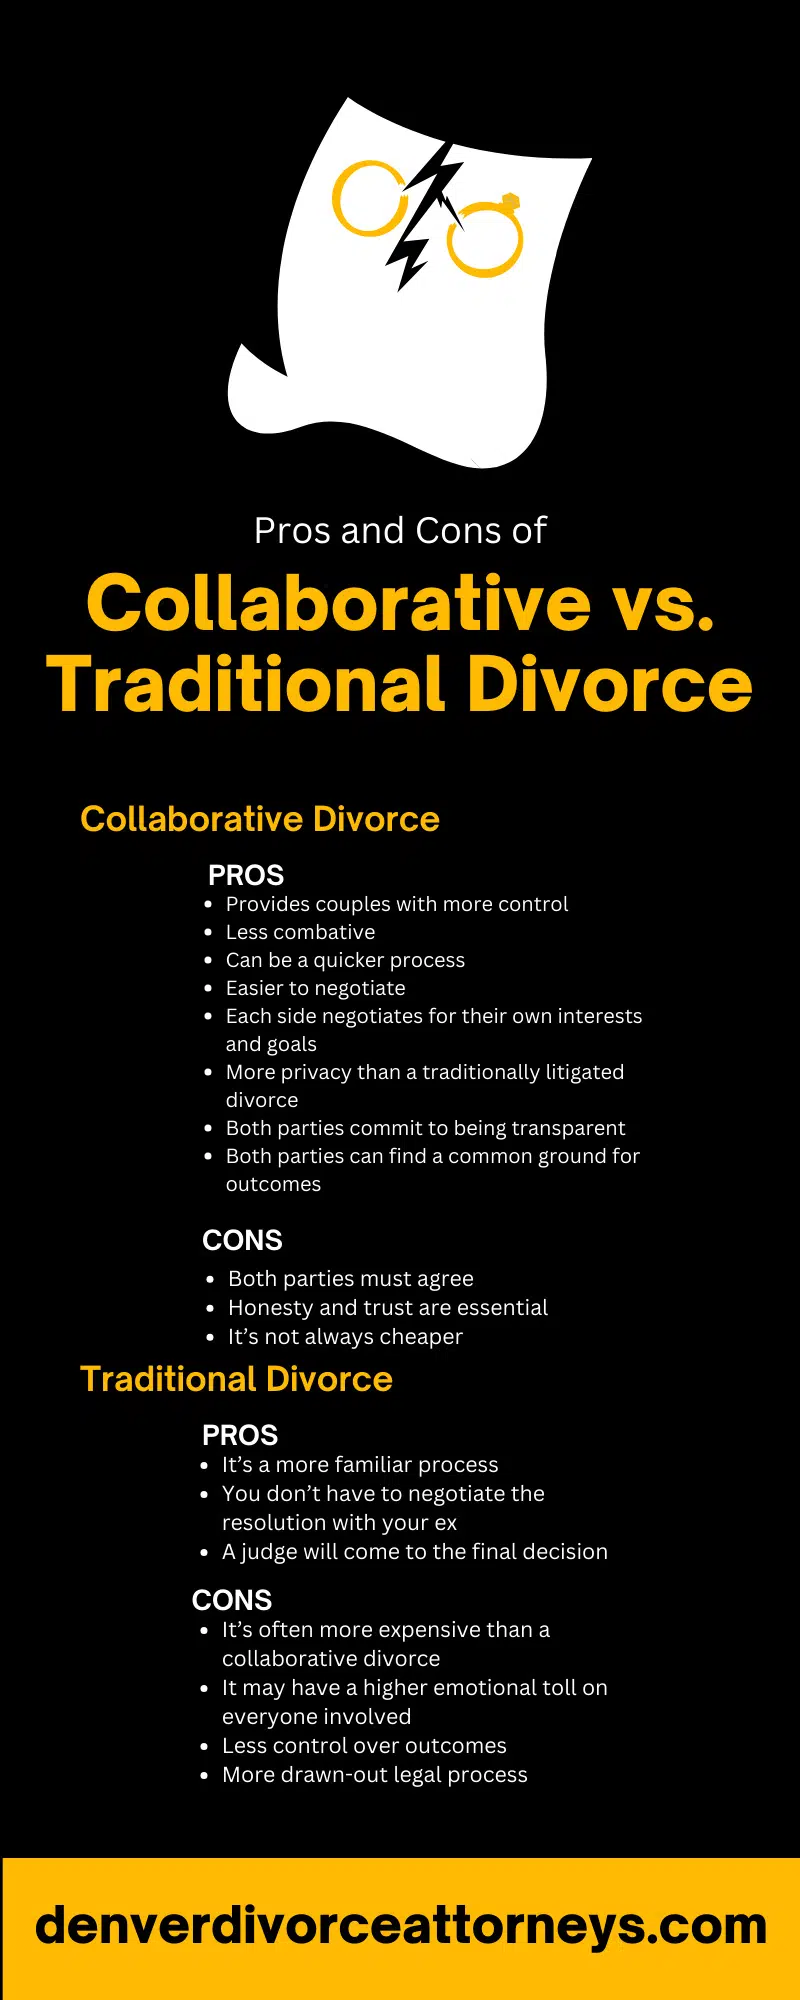 Pros and Cons of Collaborative vs. Traditional Divorce
